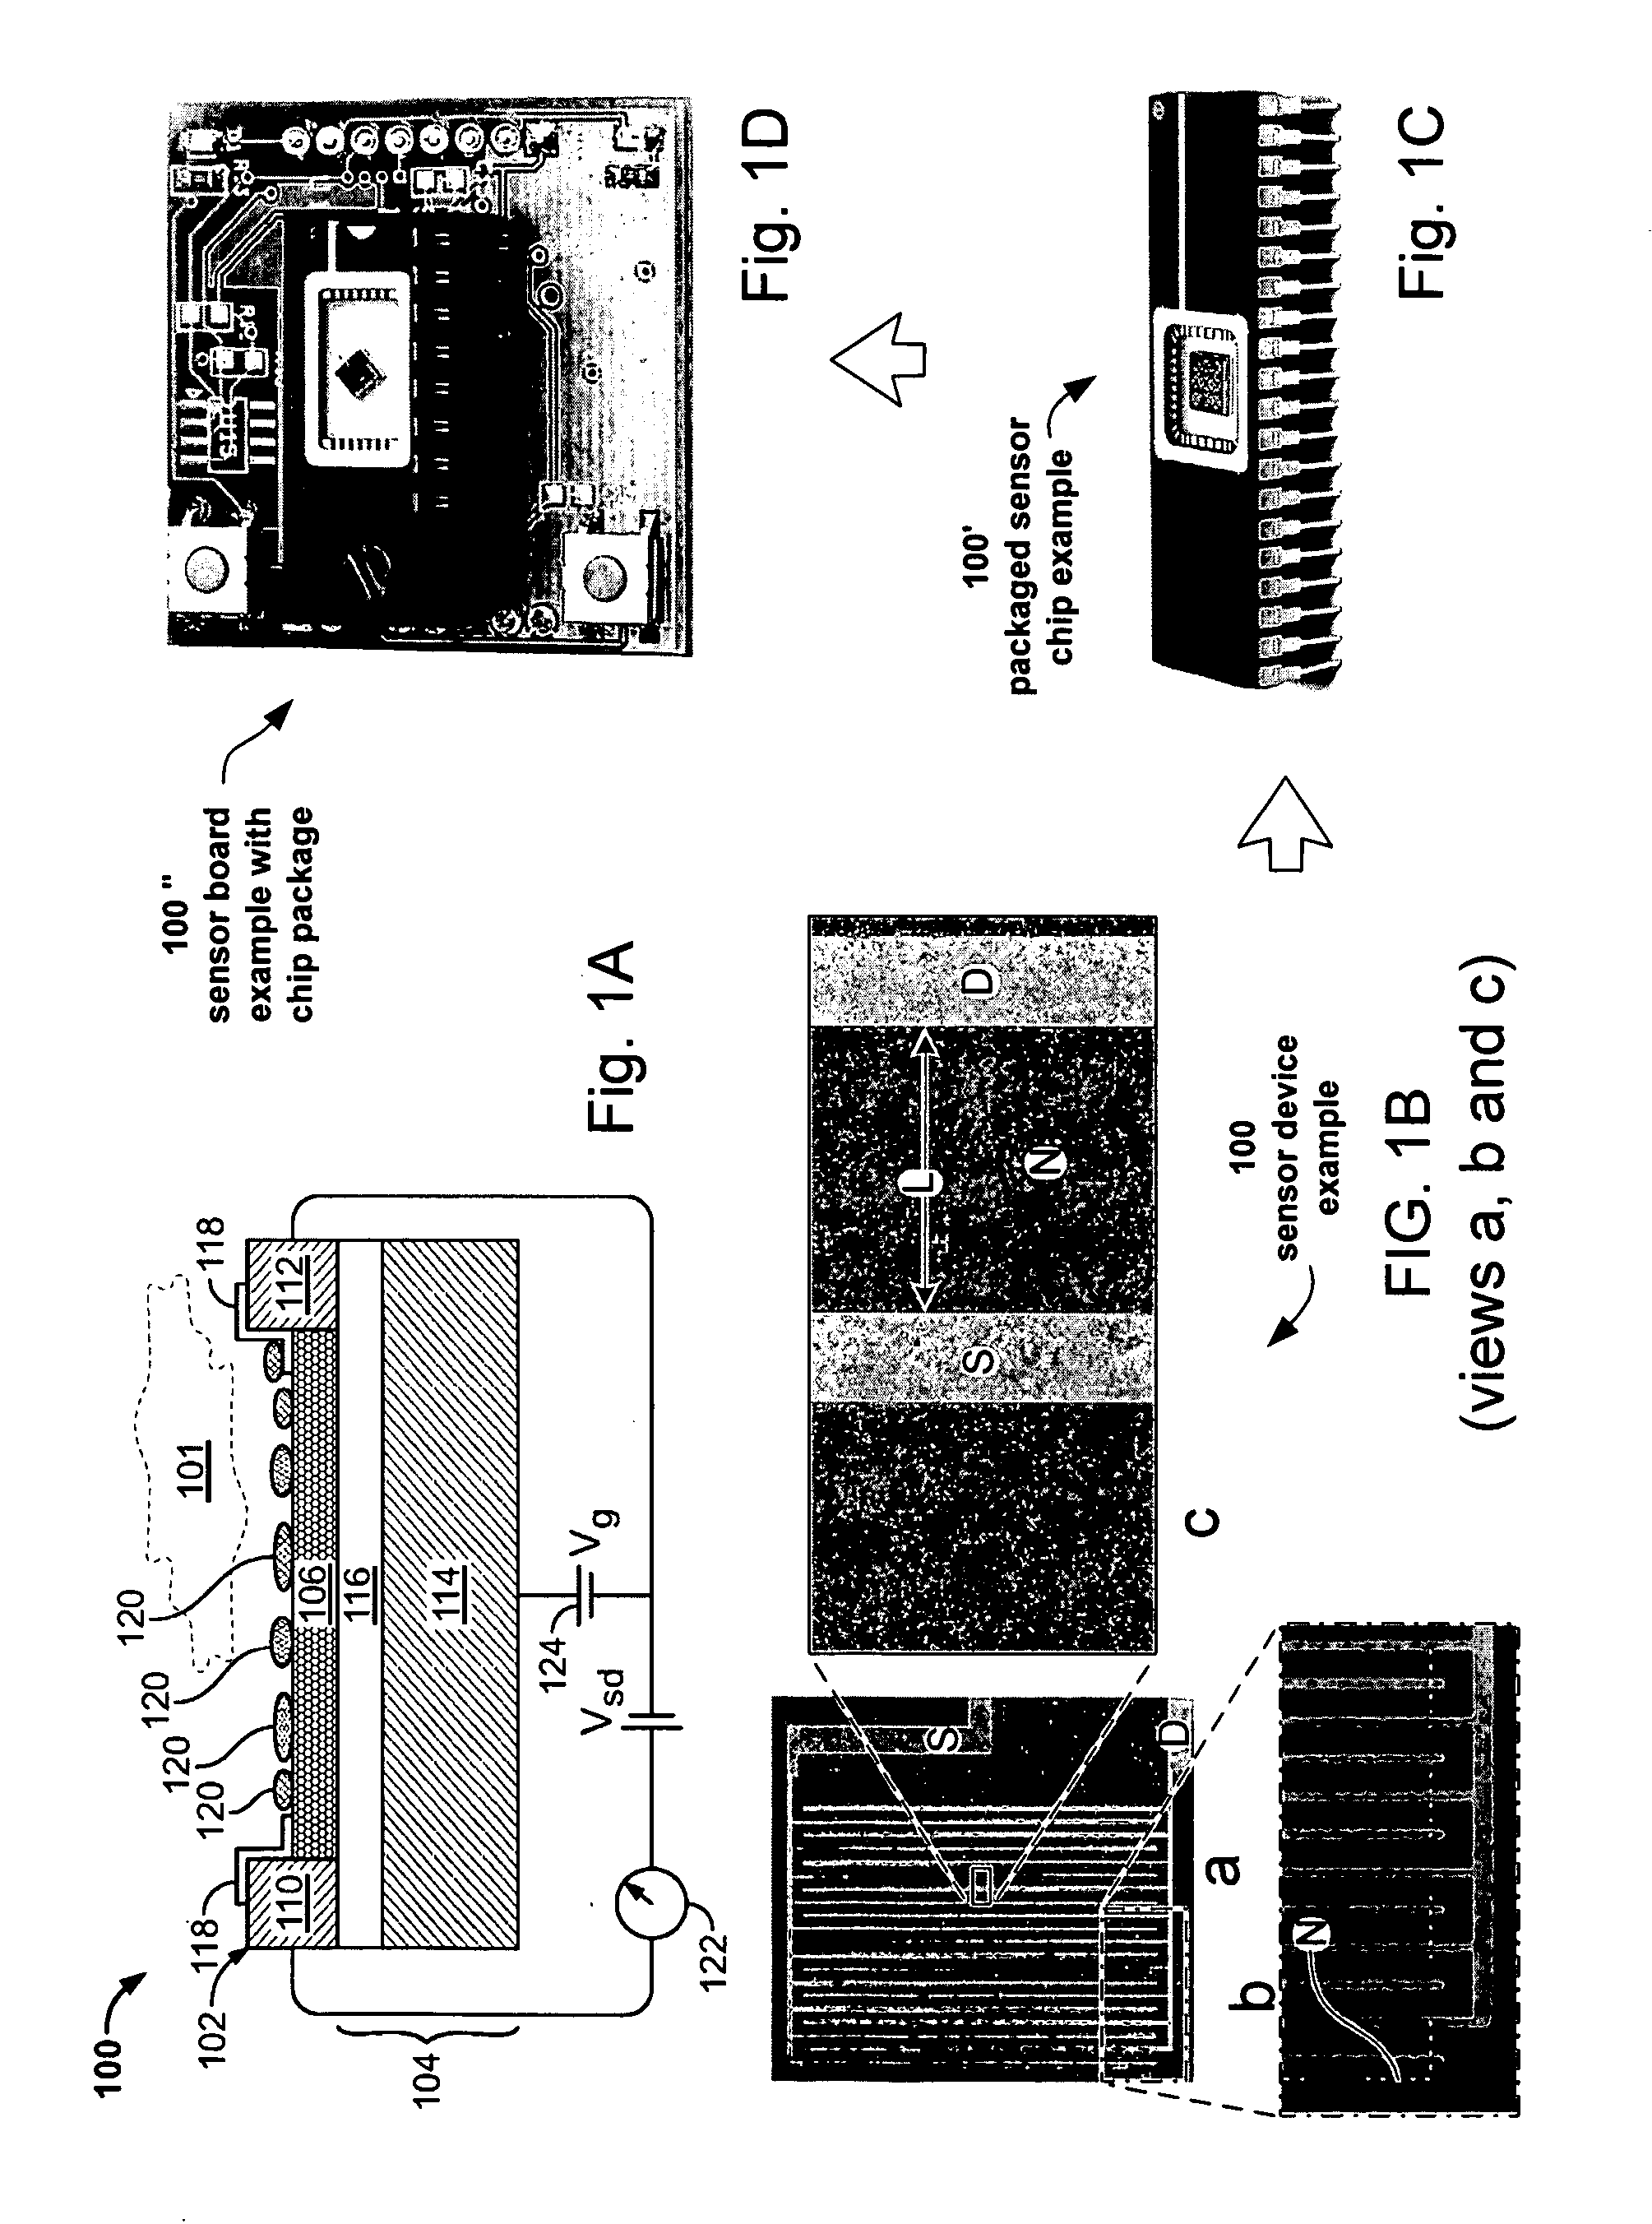 Nano-electronic sensors for chemical and biological analytes, including capacitance and bio-membrane devices